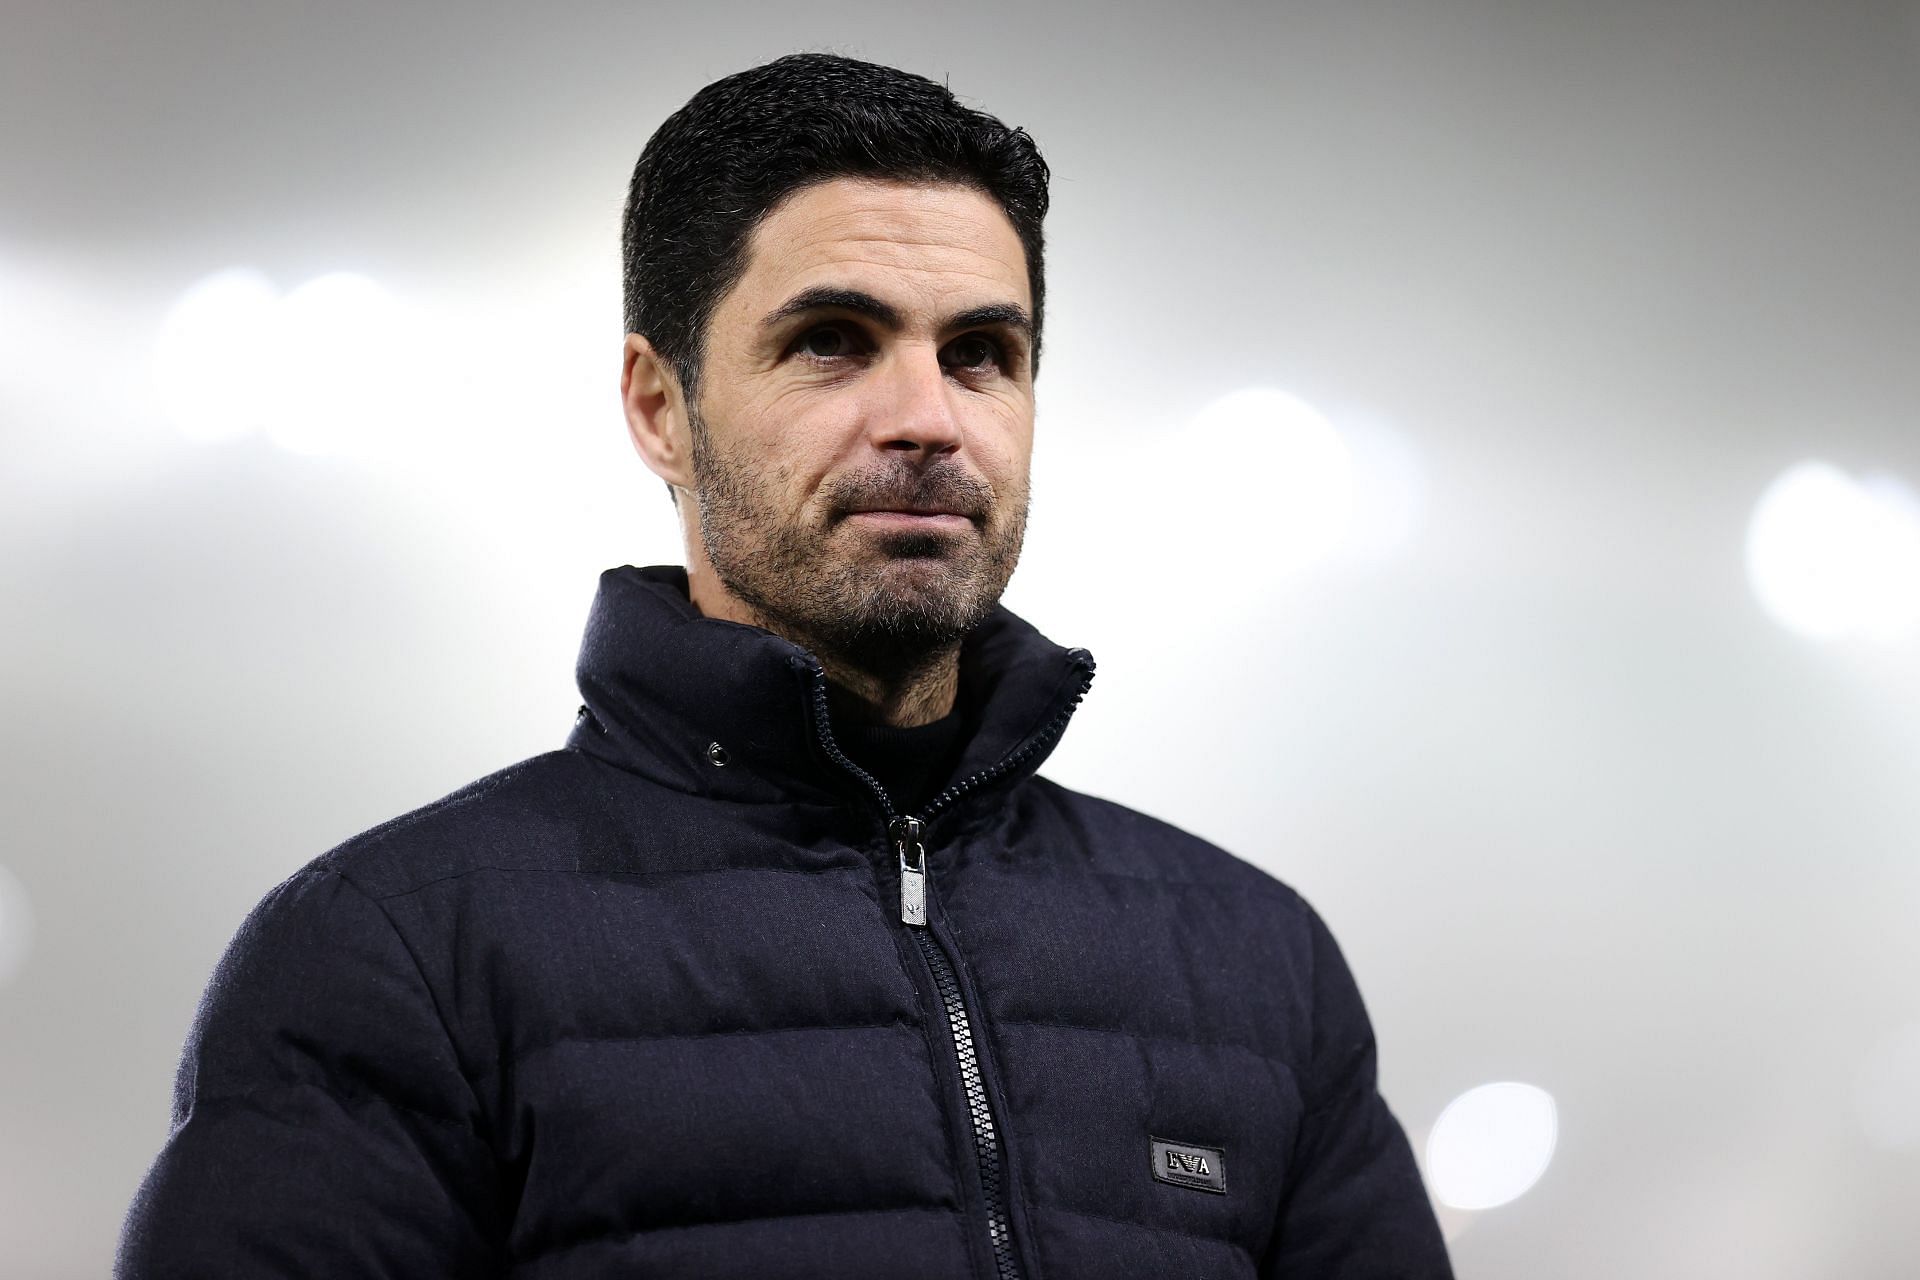 Arsenal manager Mikel Arteta has taken his team to the semi-finals of the EFL Cup.